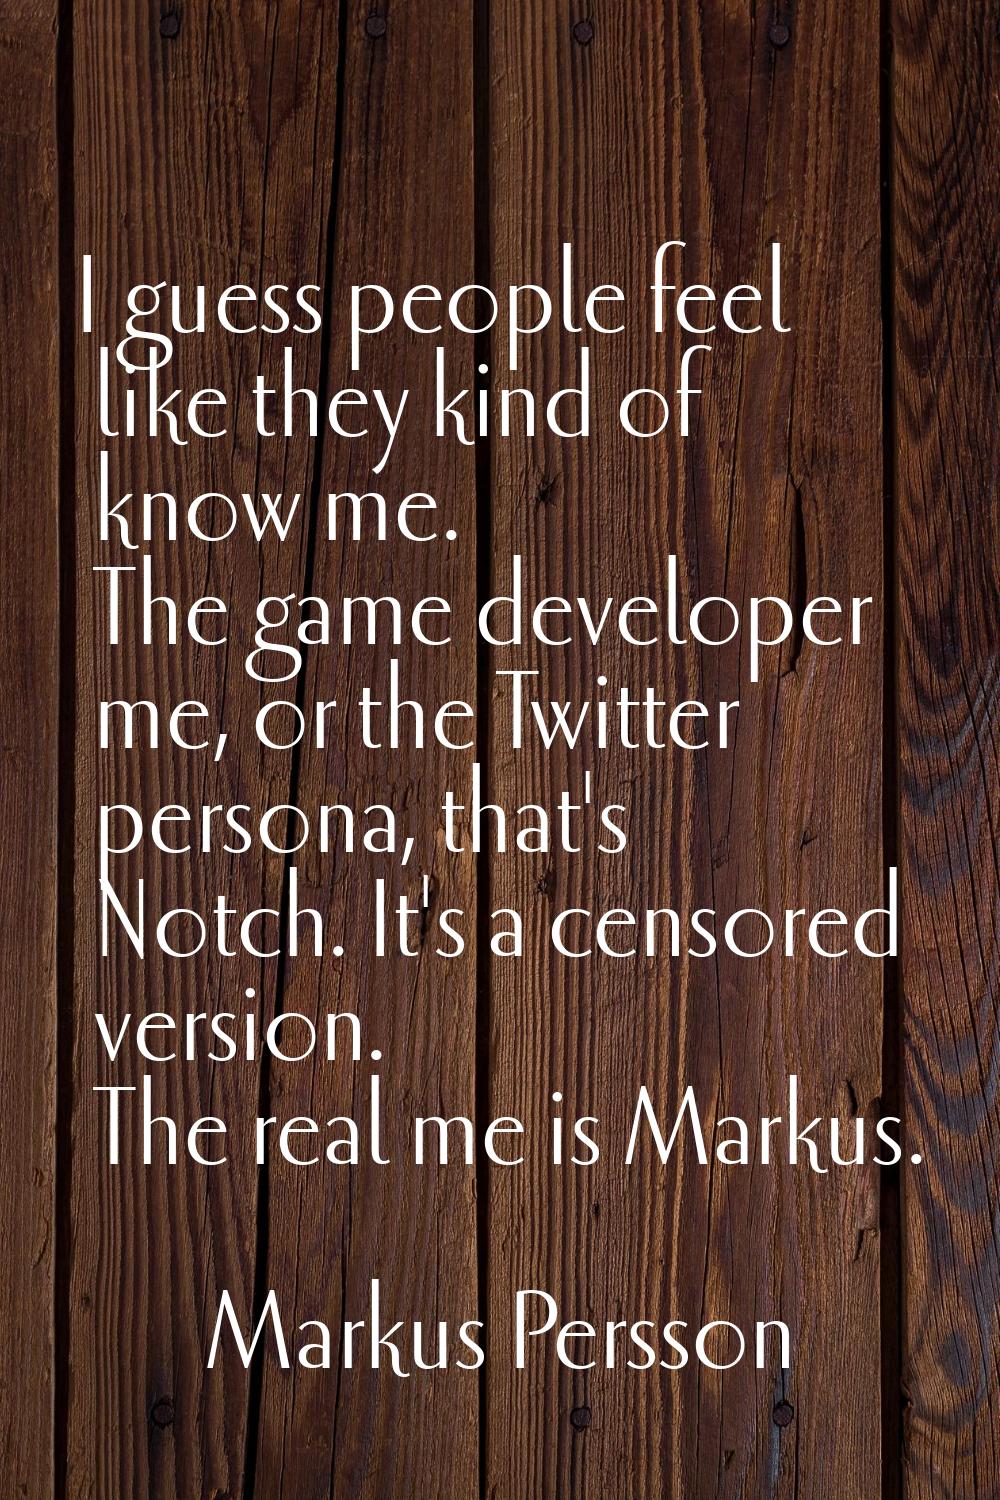 I guess people feel like they kind of know me. The game developer me, or the Twitter persona, that'